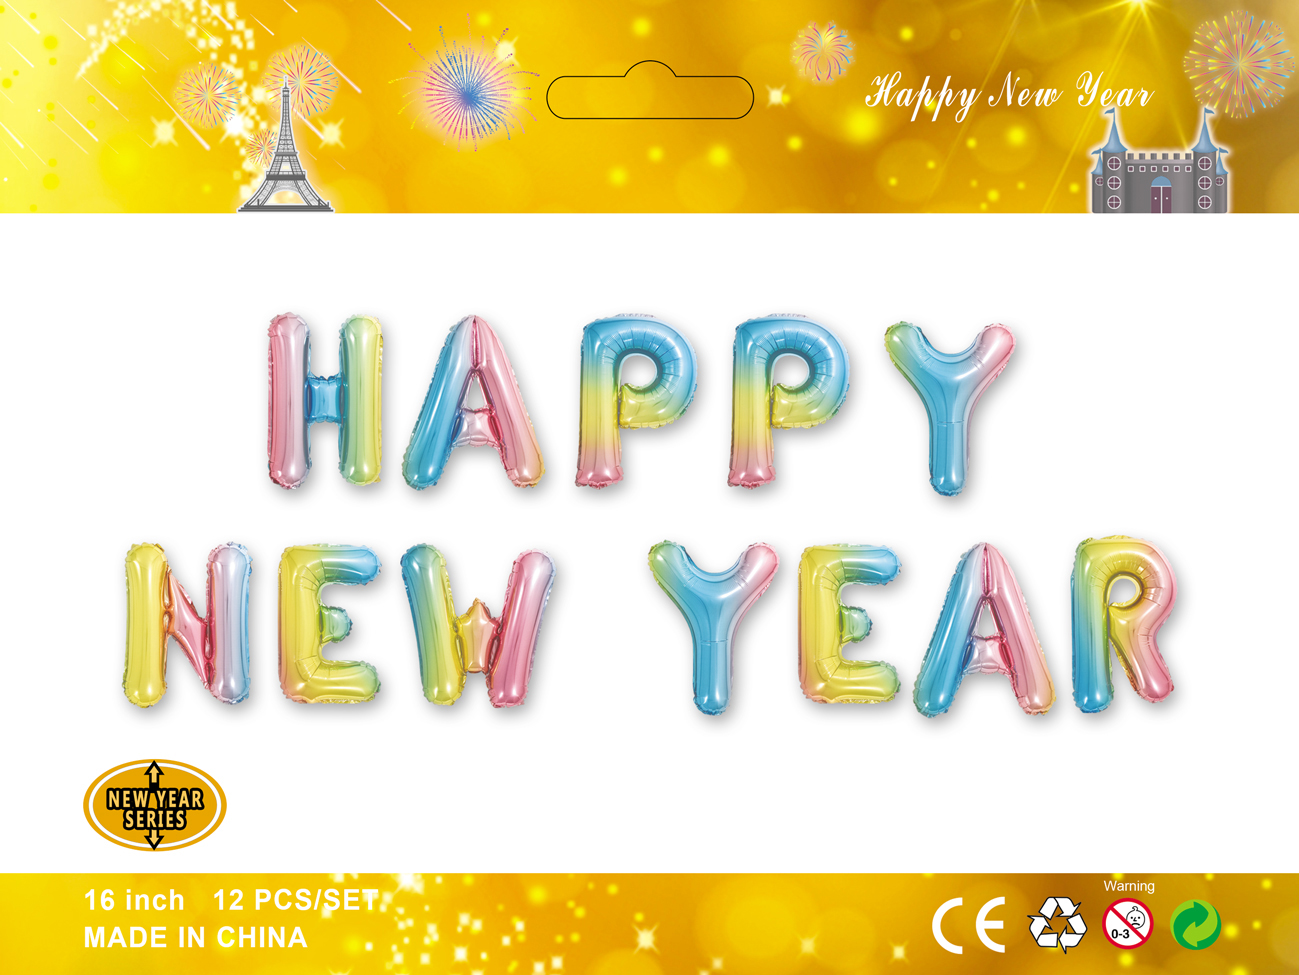 Horizontal version-Happy new year (Thin letters)